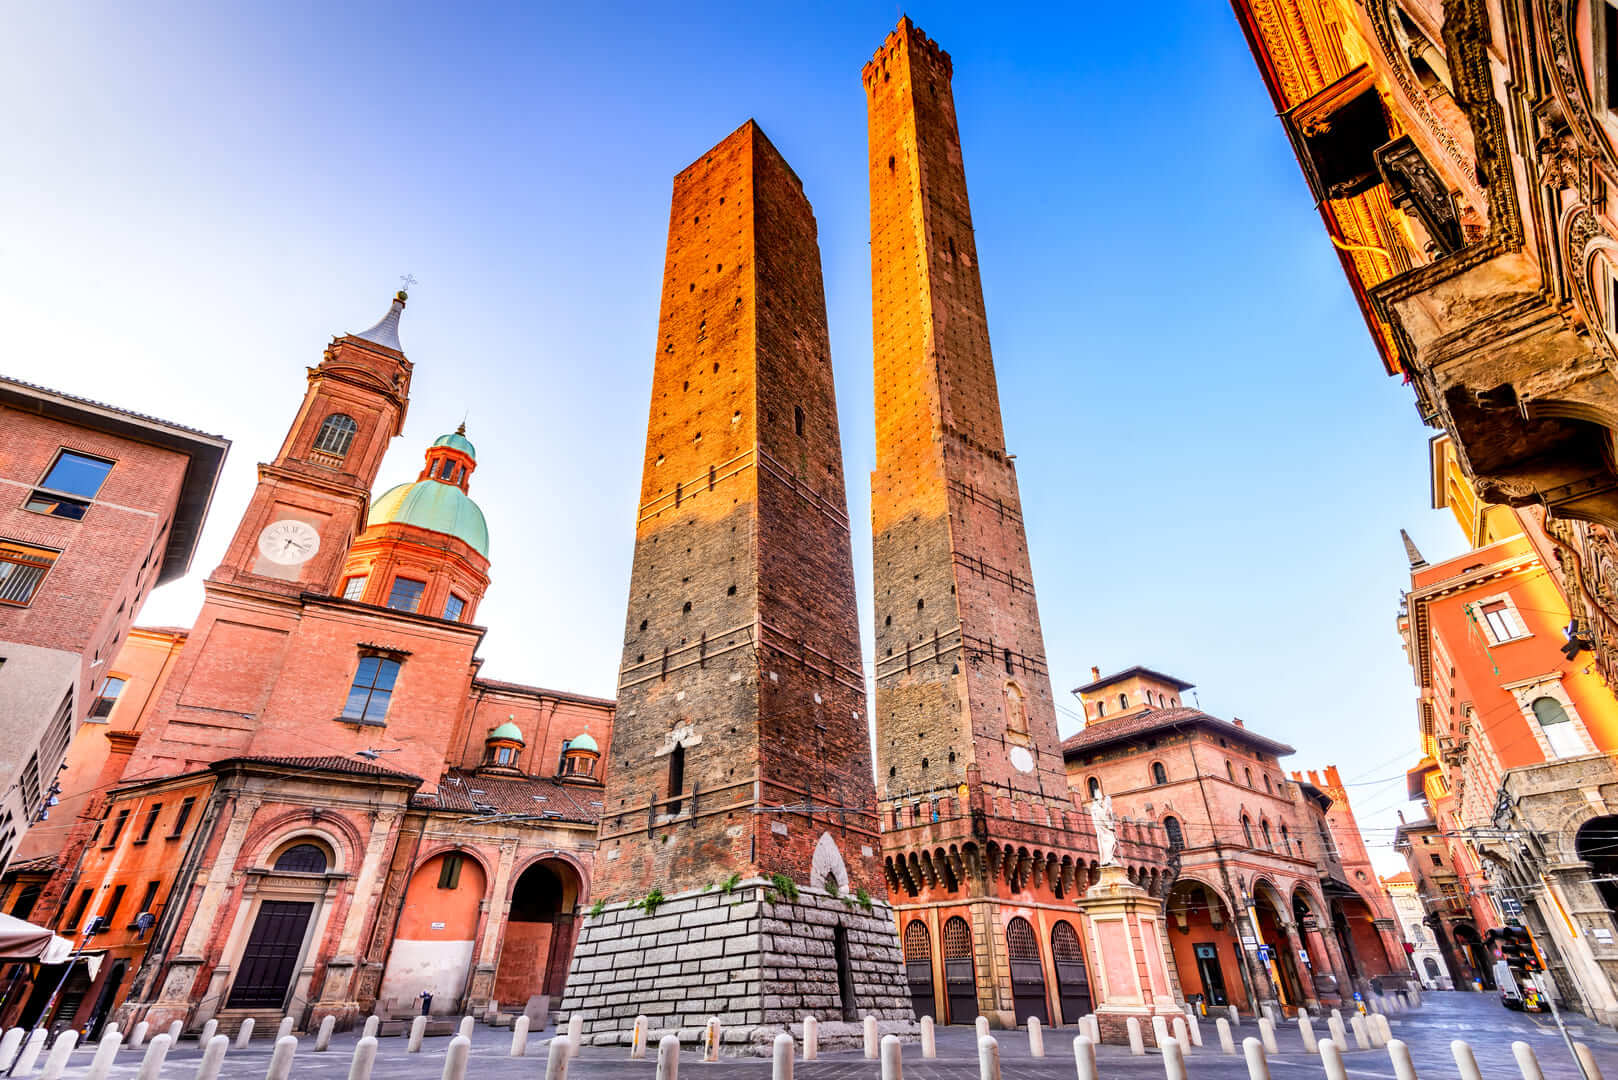 Bologna, Italy - Two Towers (Due Torri), Asinelli and Garisenda, symbols of medieval Bologna towers.